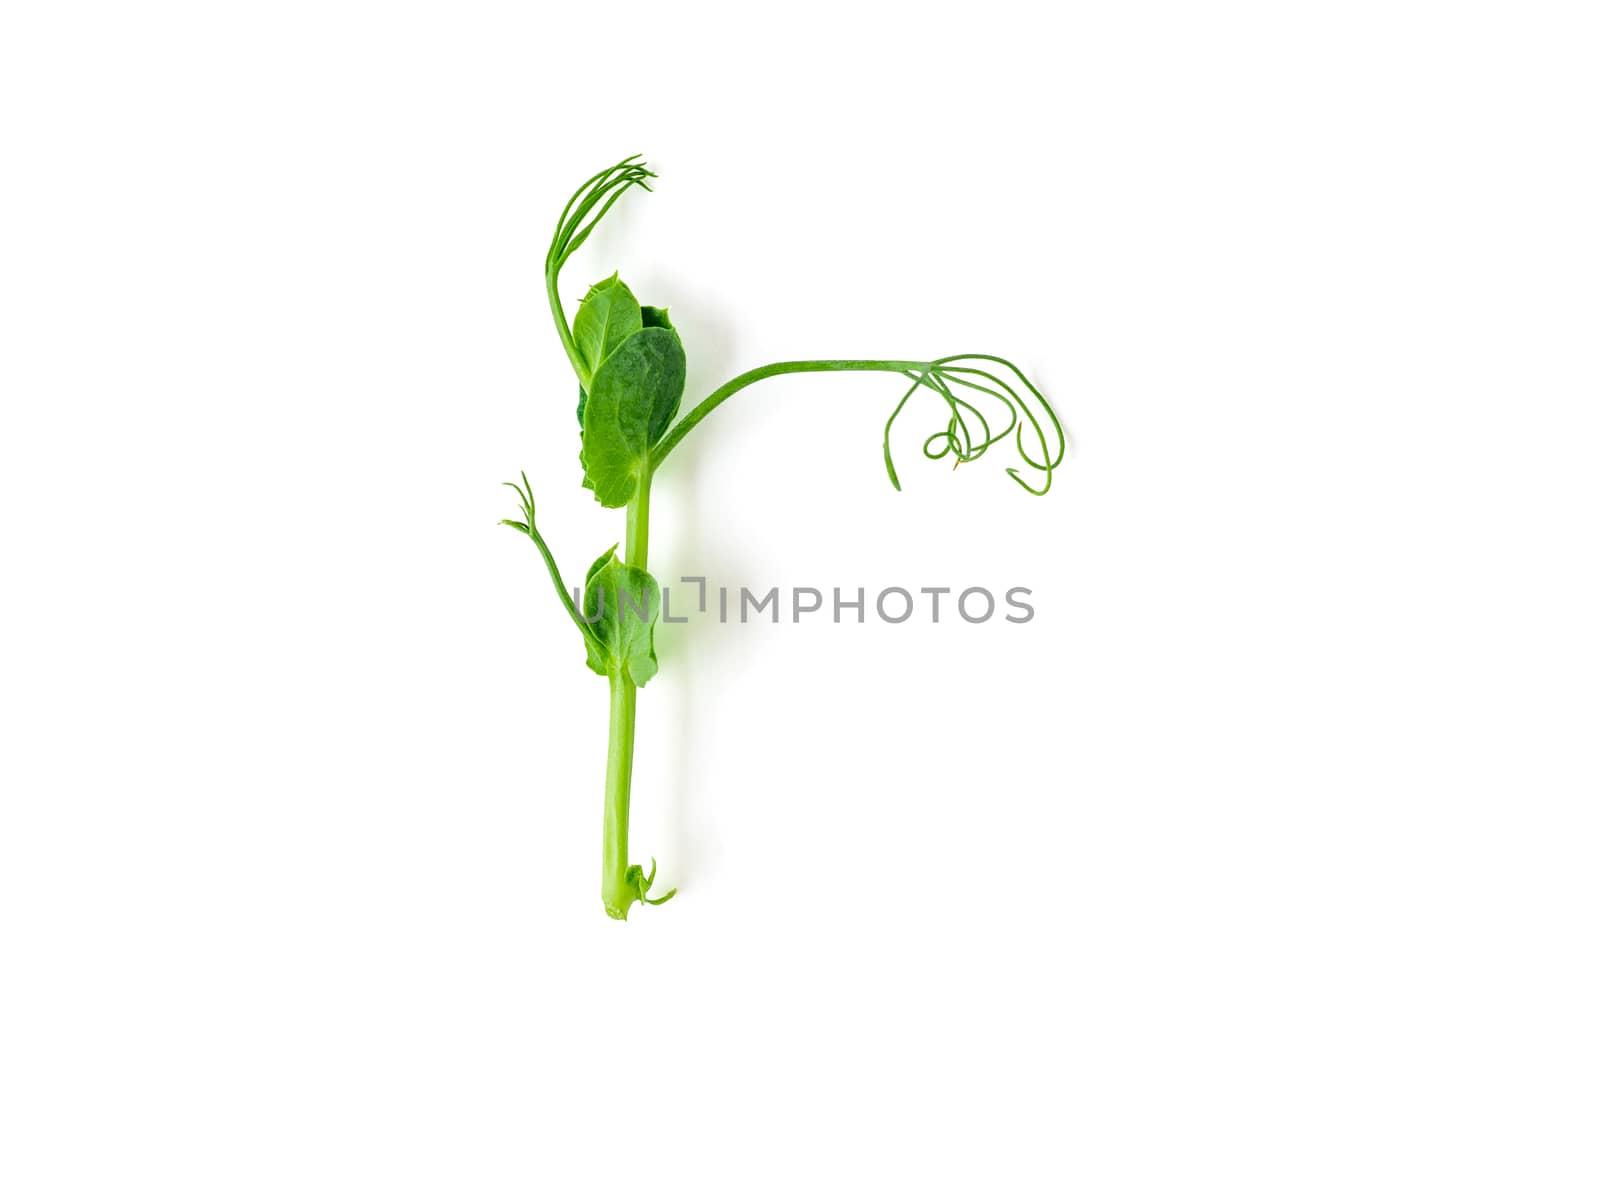 Micro greens - sprouts peas isolated on white background. Top view or flat lay.